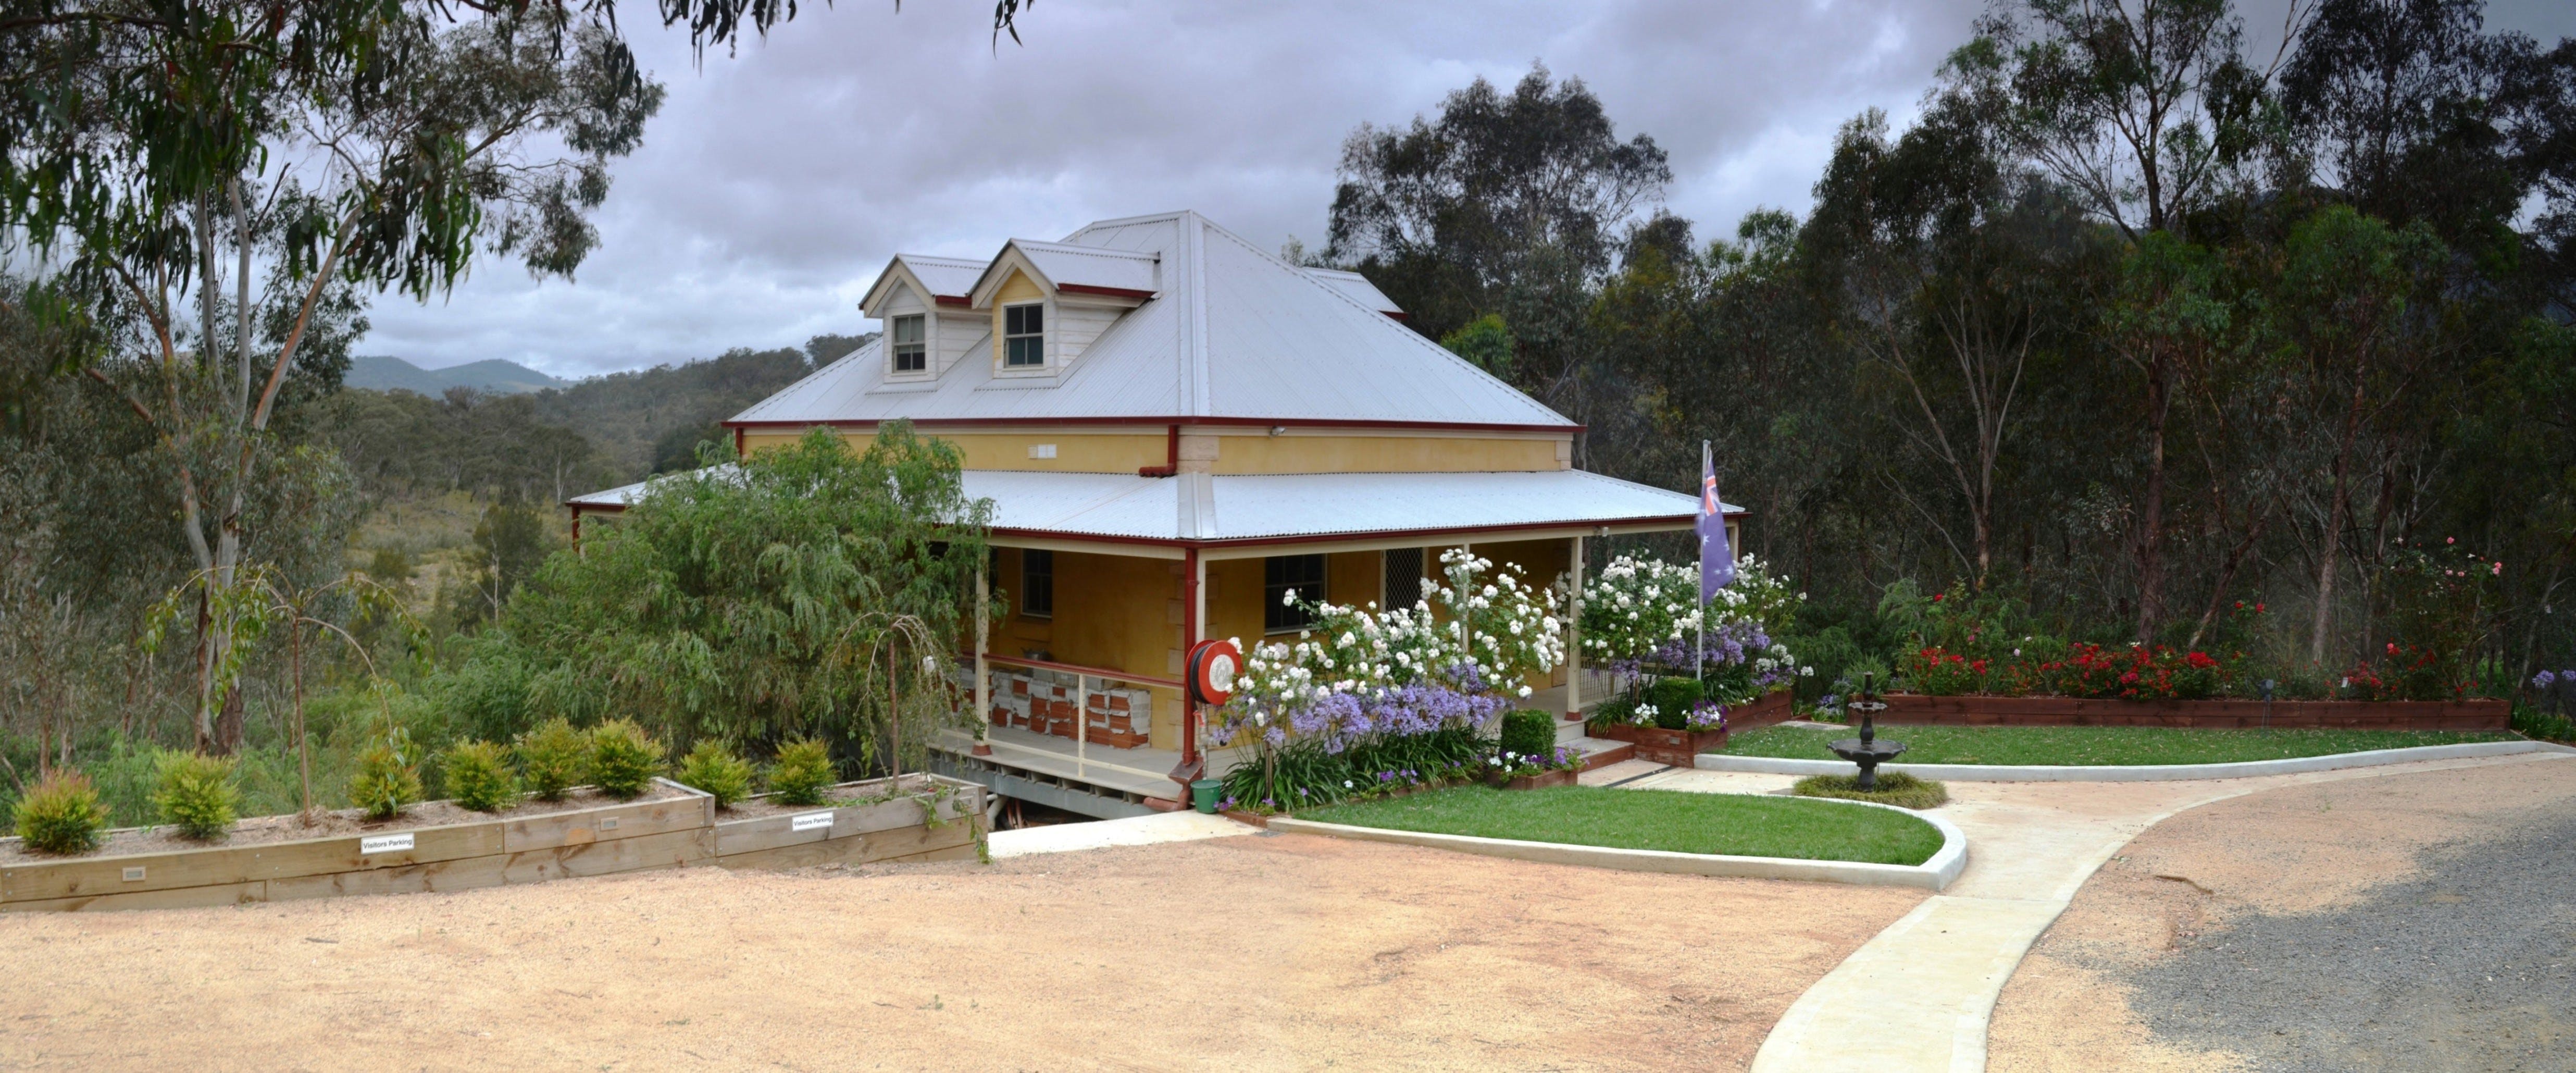 Tanwarra Lodge Bed and Breakfast - Accommodation in Surfers Paradise